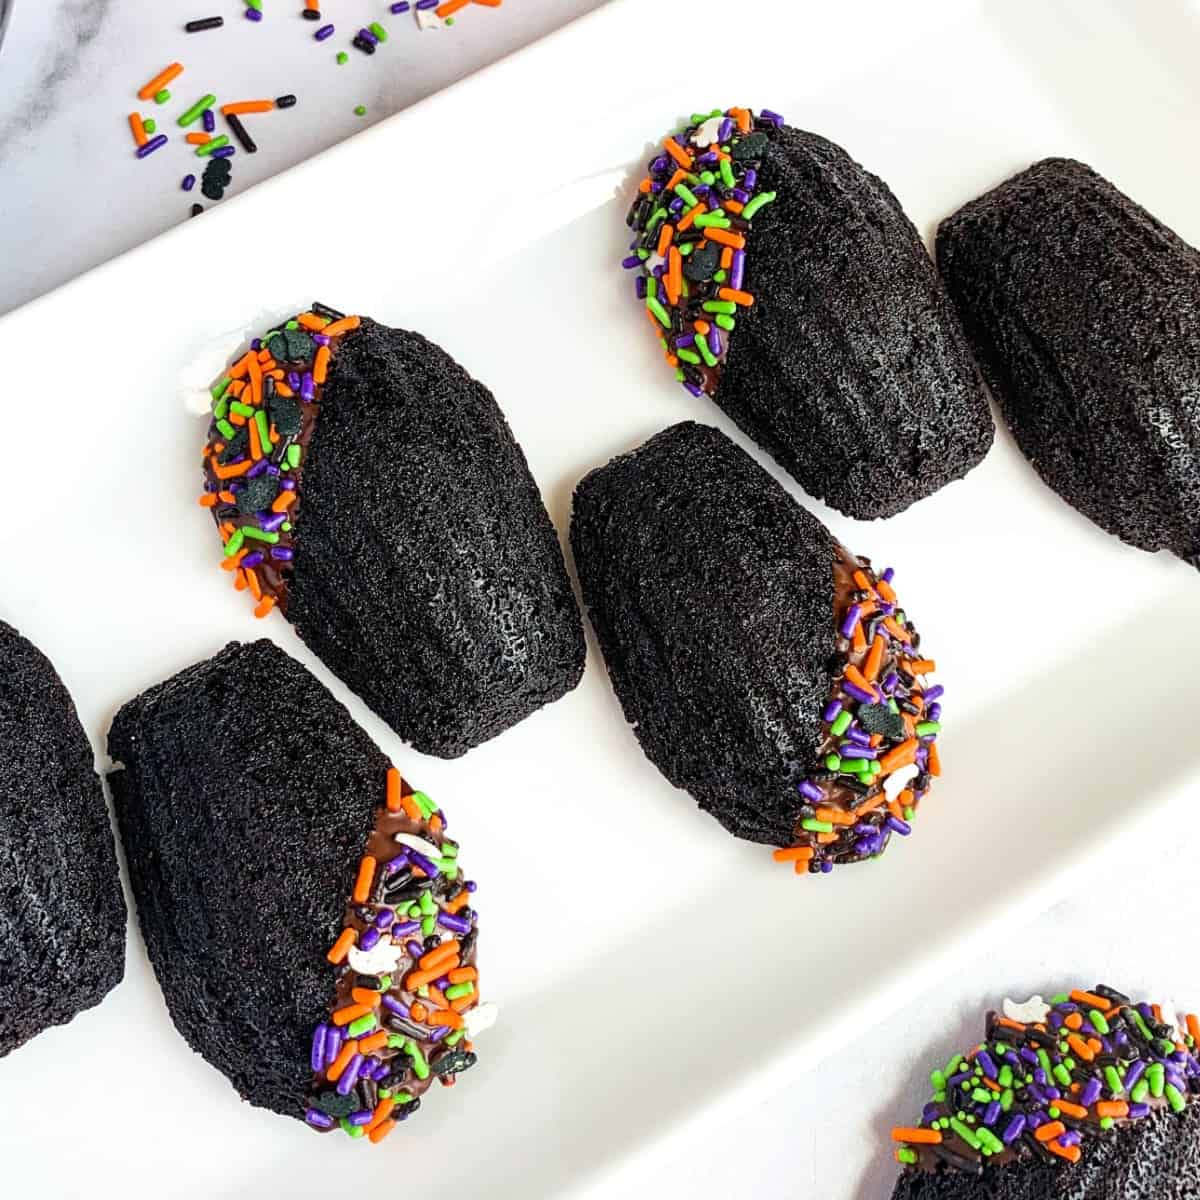 Chocolate Madeleines with Halloween sprinkles on a white plate.